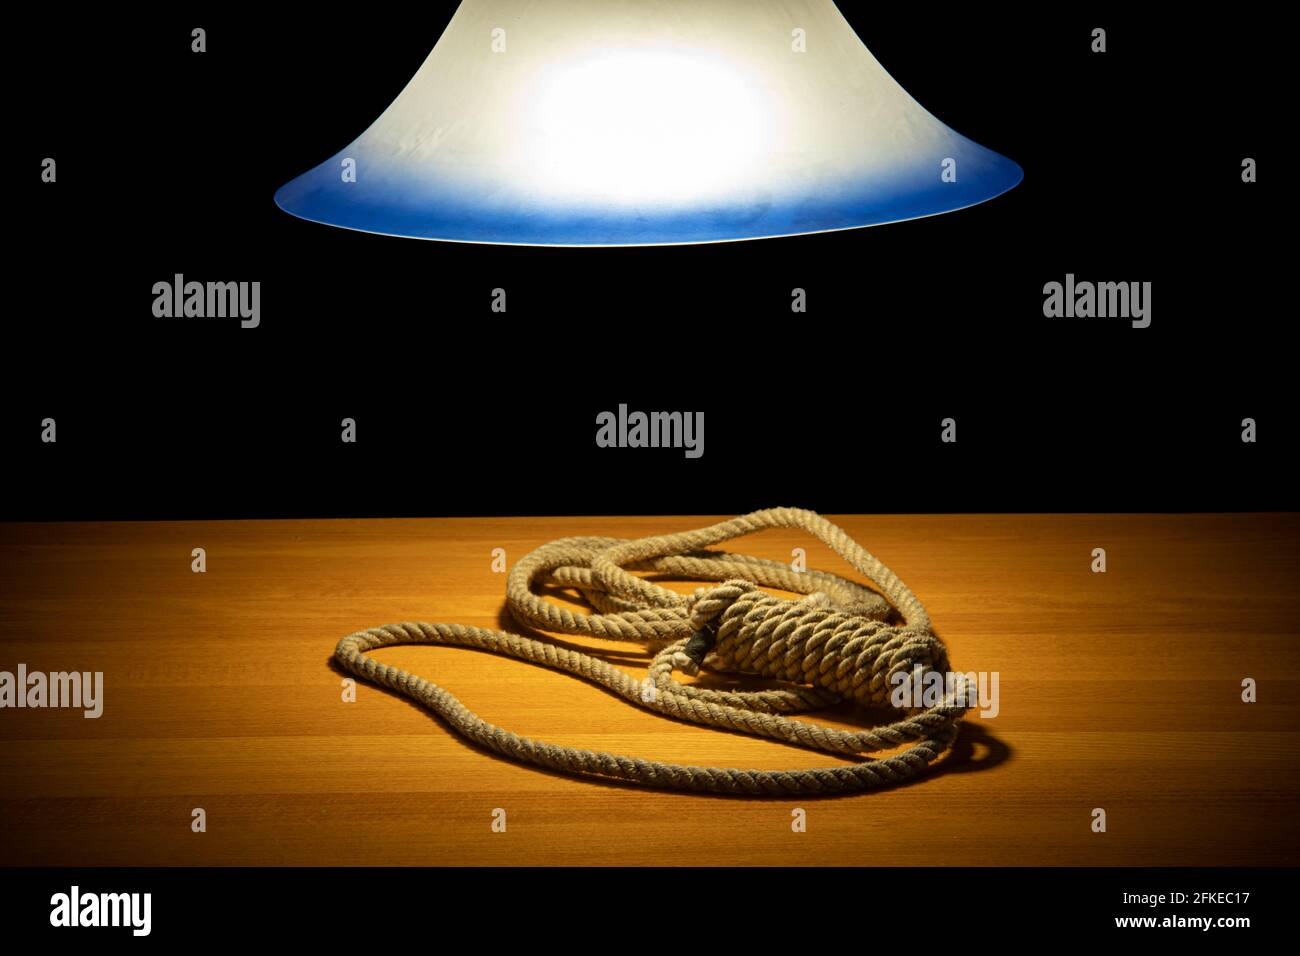 A noose lying on the table under a glowing chandelier, on a black background Stock Photo